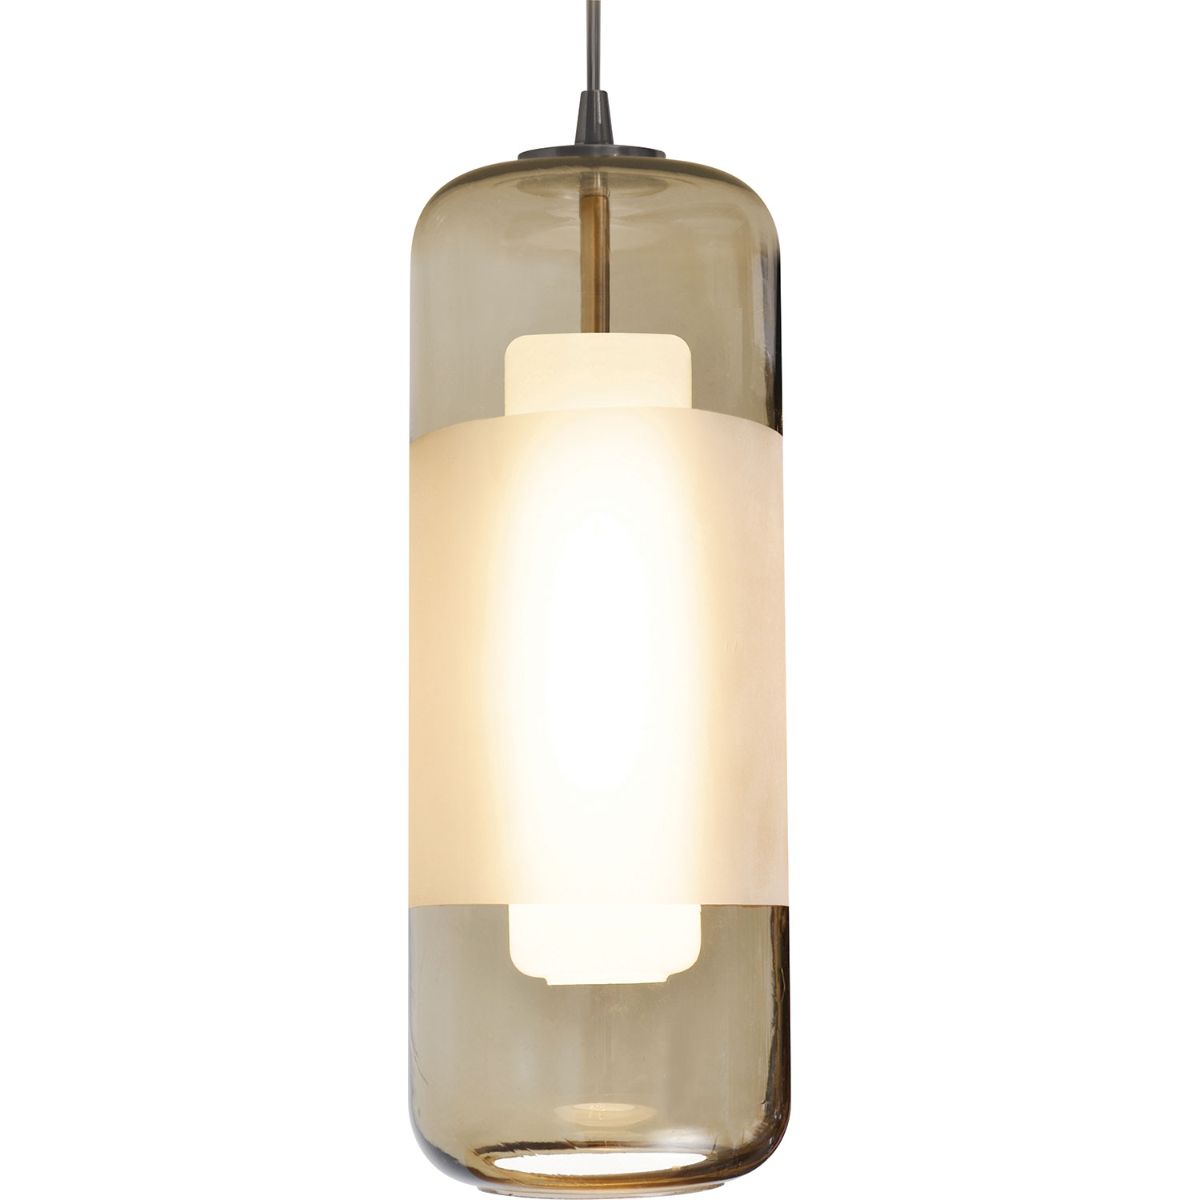 Hermosa 6 in. LED Pendant Light 120V 4000K Satin Nickel finish with Brown & White shade